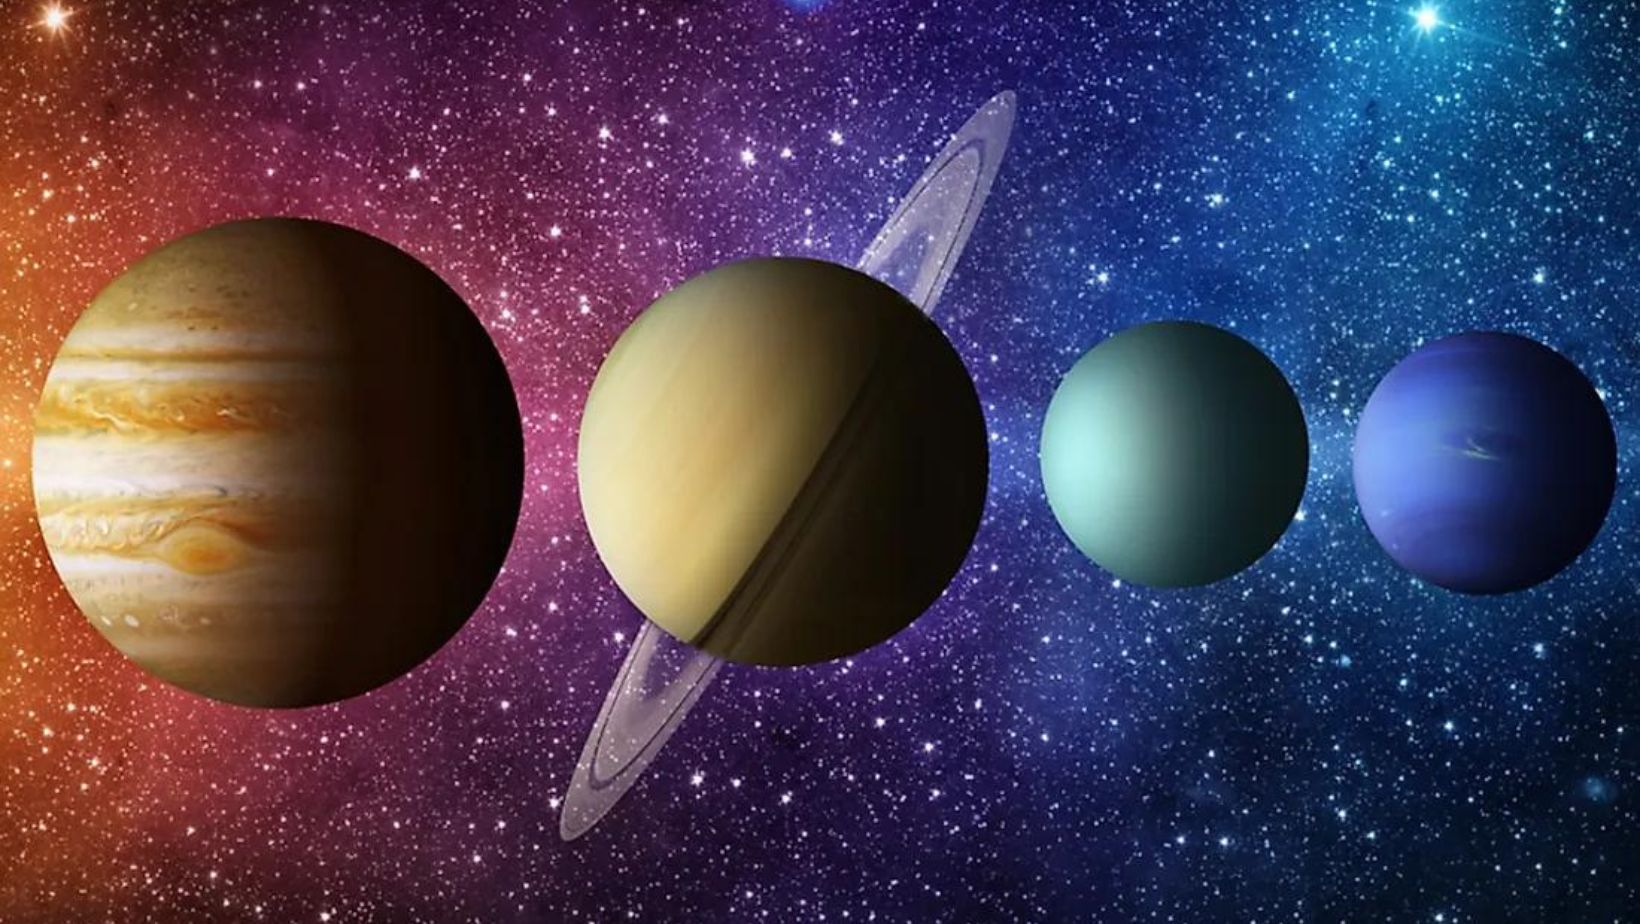 How do scientists study the atmospheres of gas giants